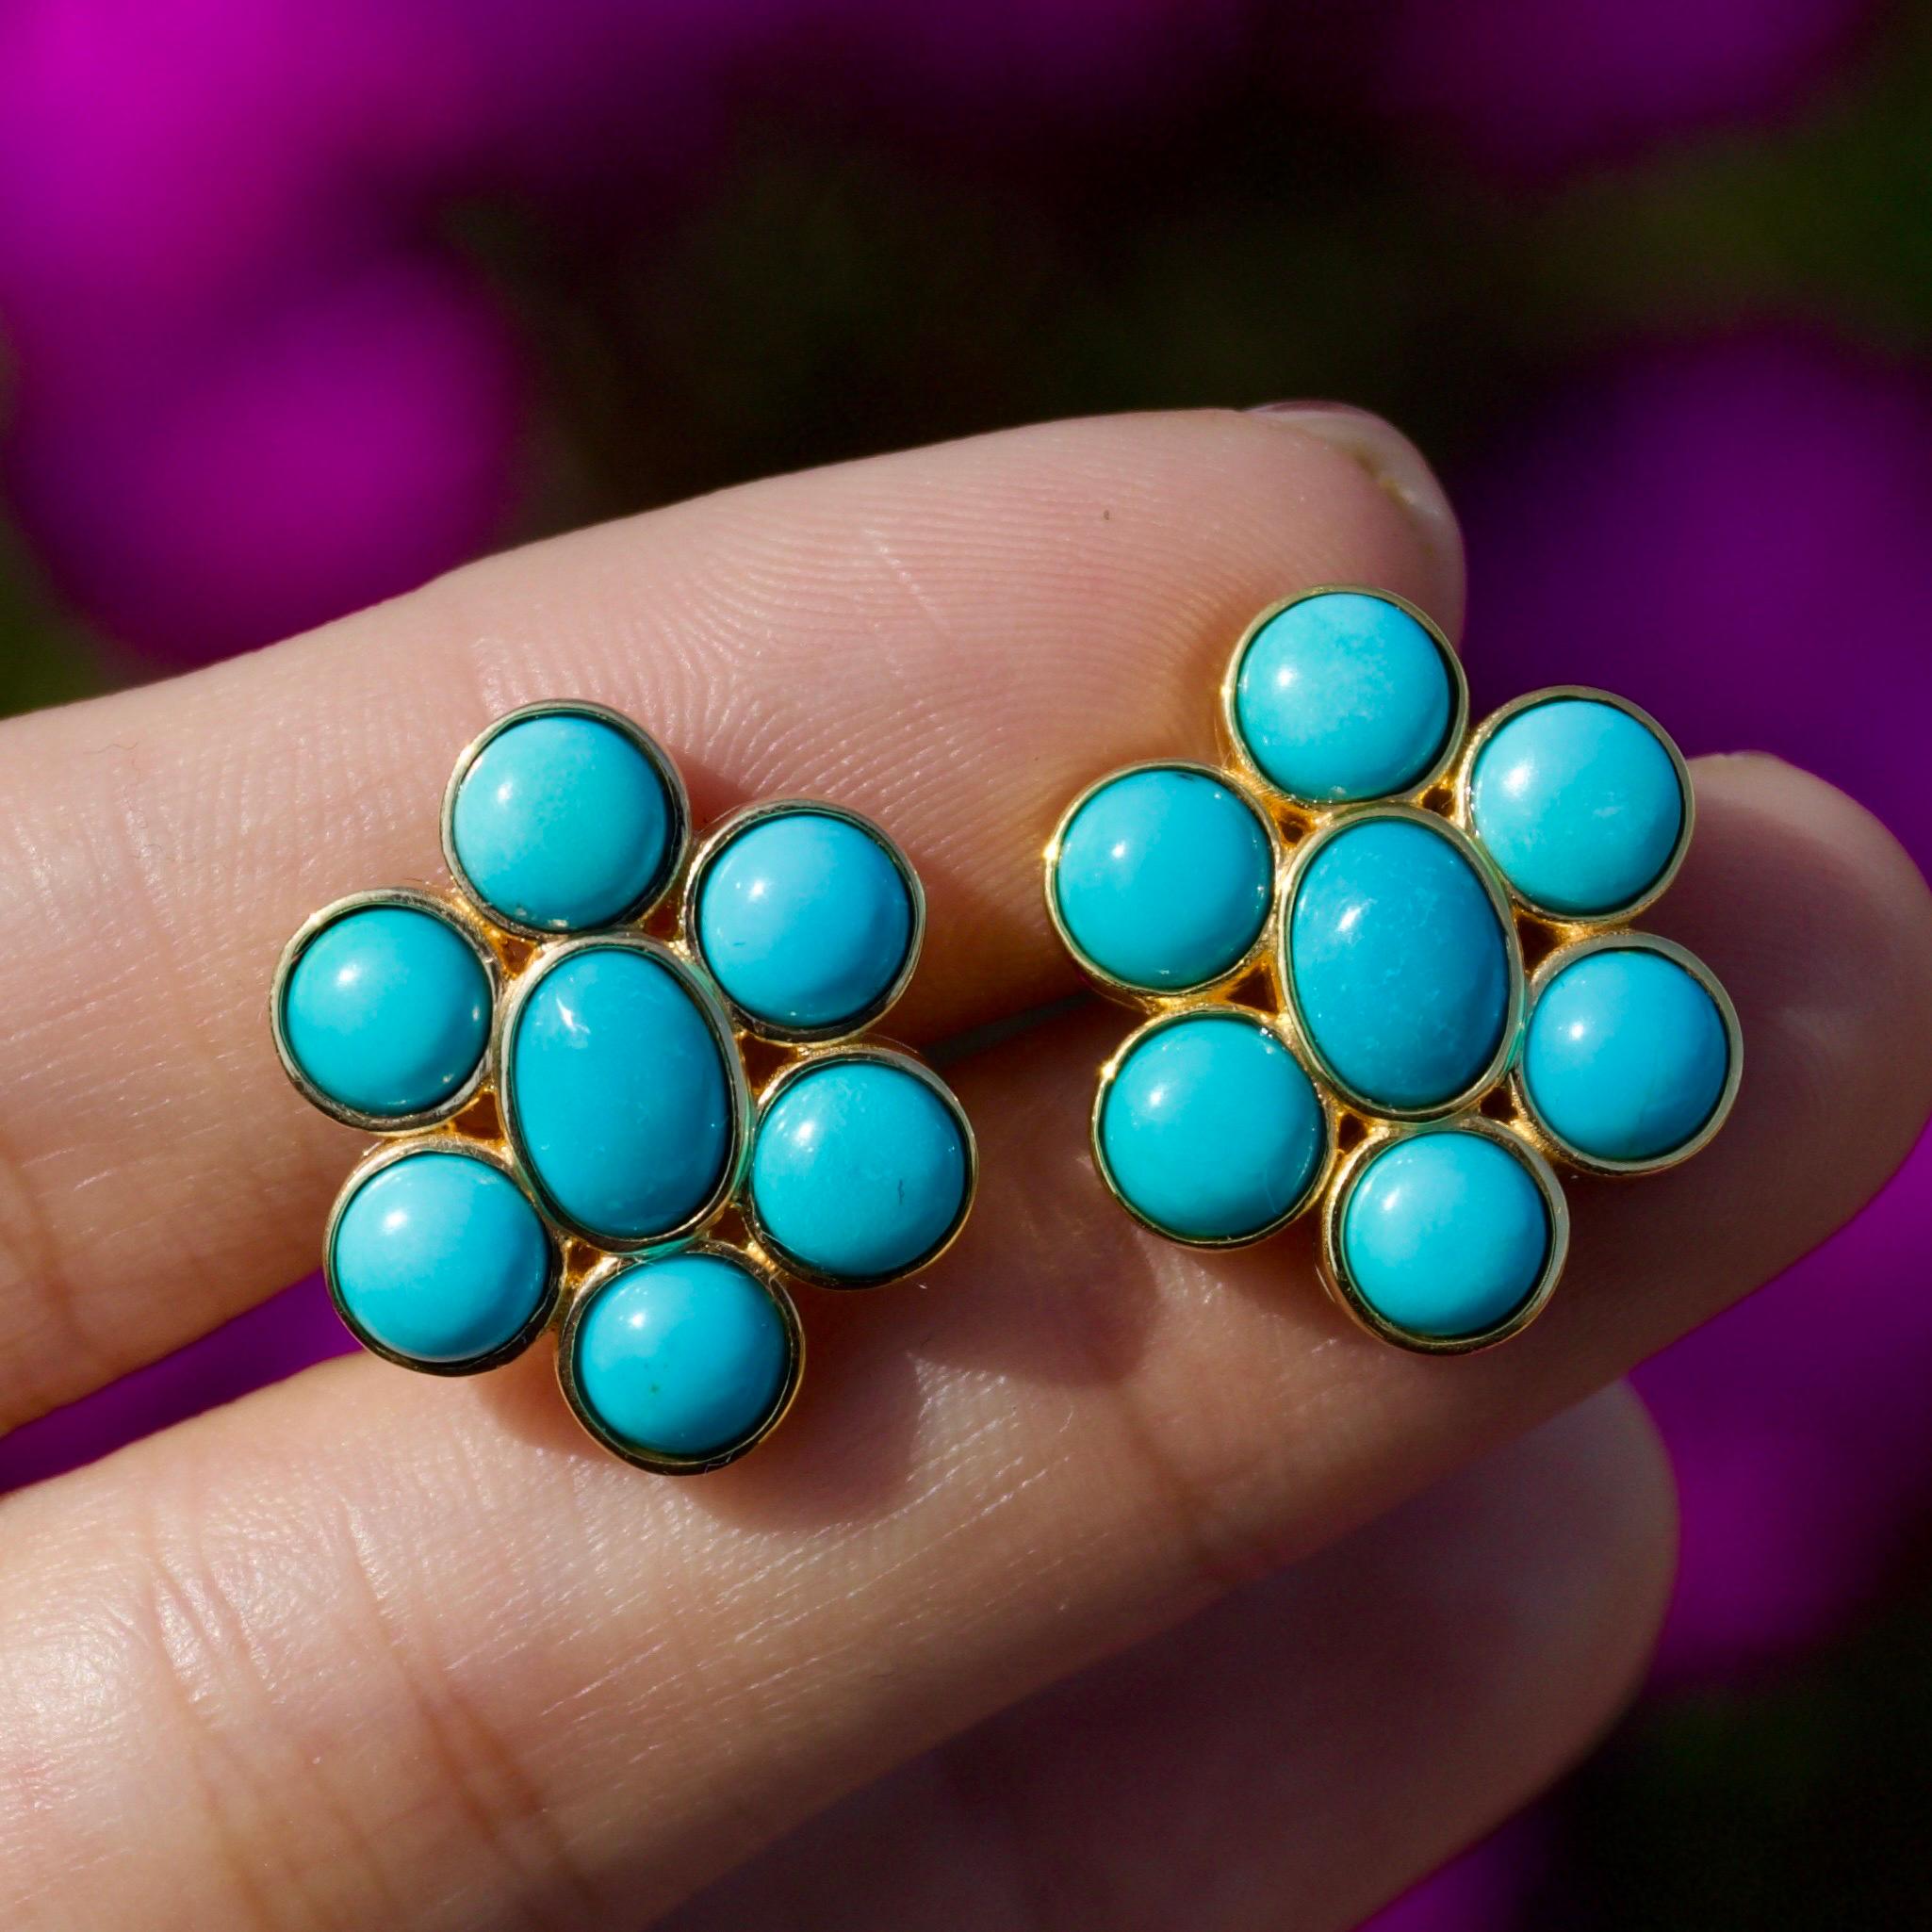 Nina Zhou 8ct Blue Turquoise Gemstone Cluster Earrings in 18k Yellow Gold In New Condition For Sale In Rowland Heights, CA